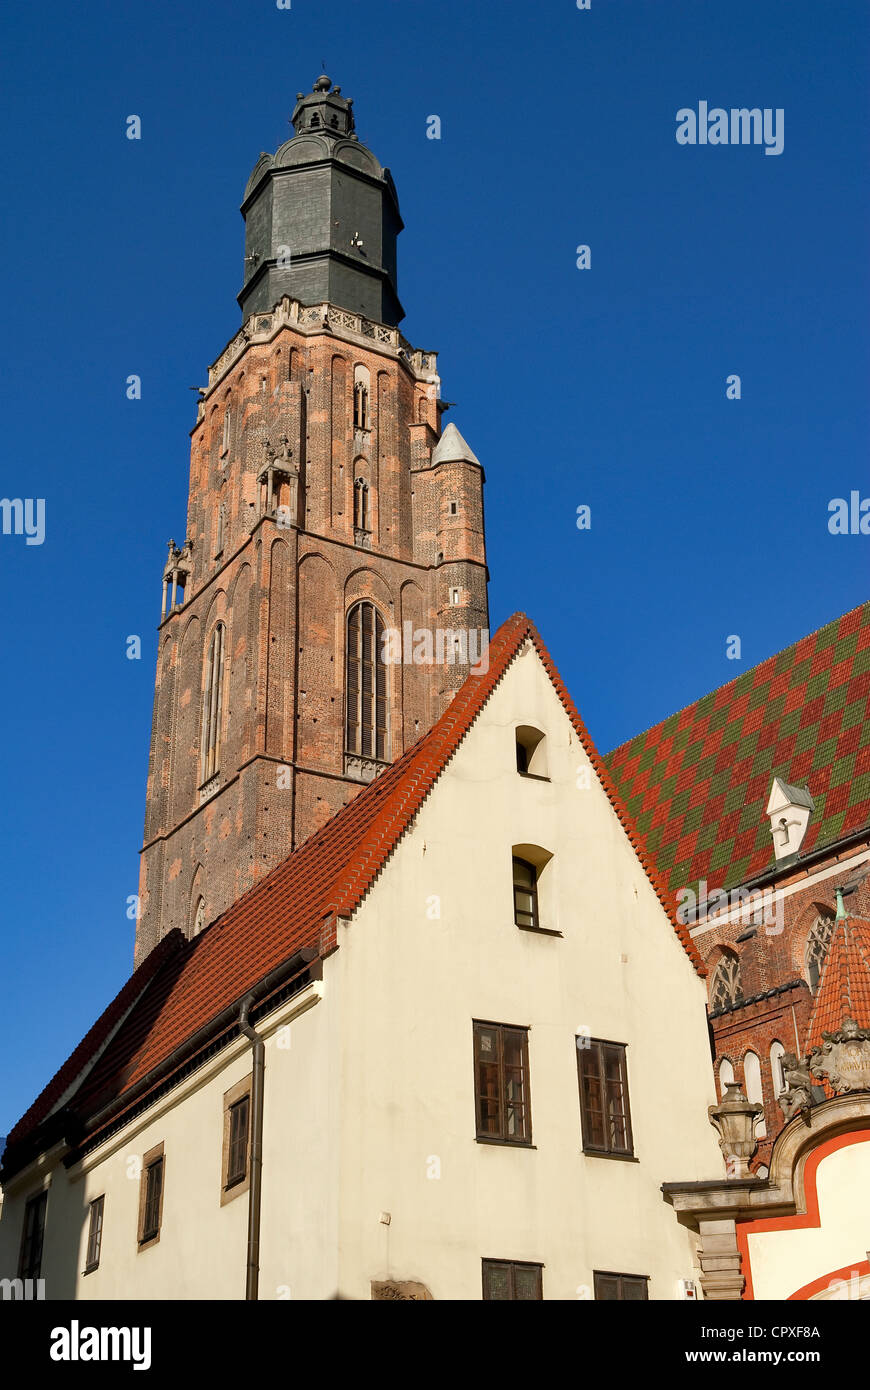 Poland, Silesia, Wroclaw, the Rynek, the Church of St. Elizabeth which stands in a corner of the Rynek, the old market square Stock Photo